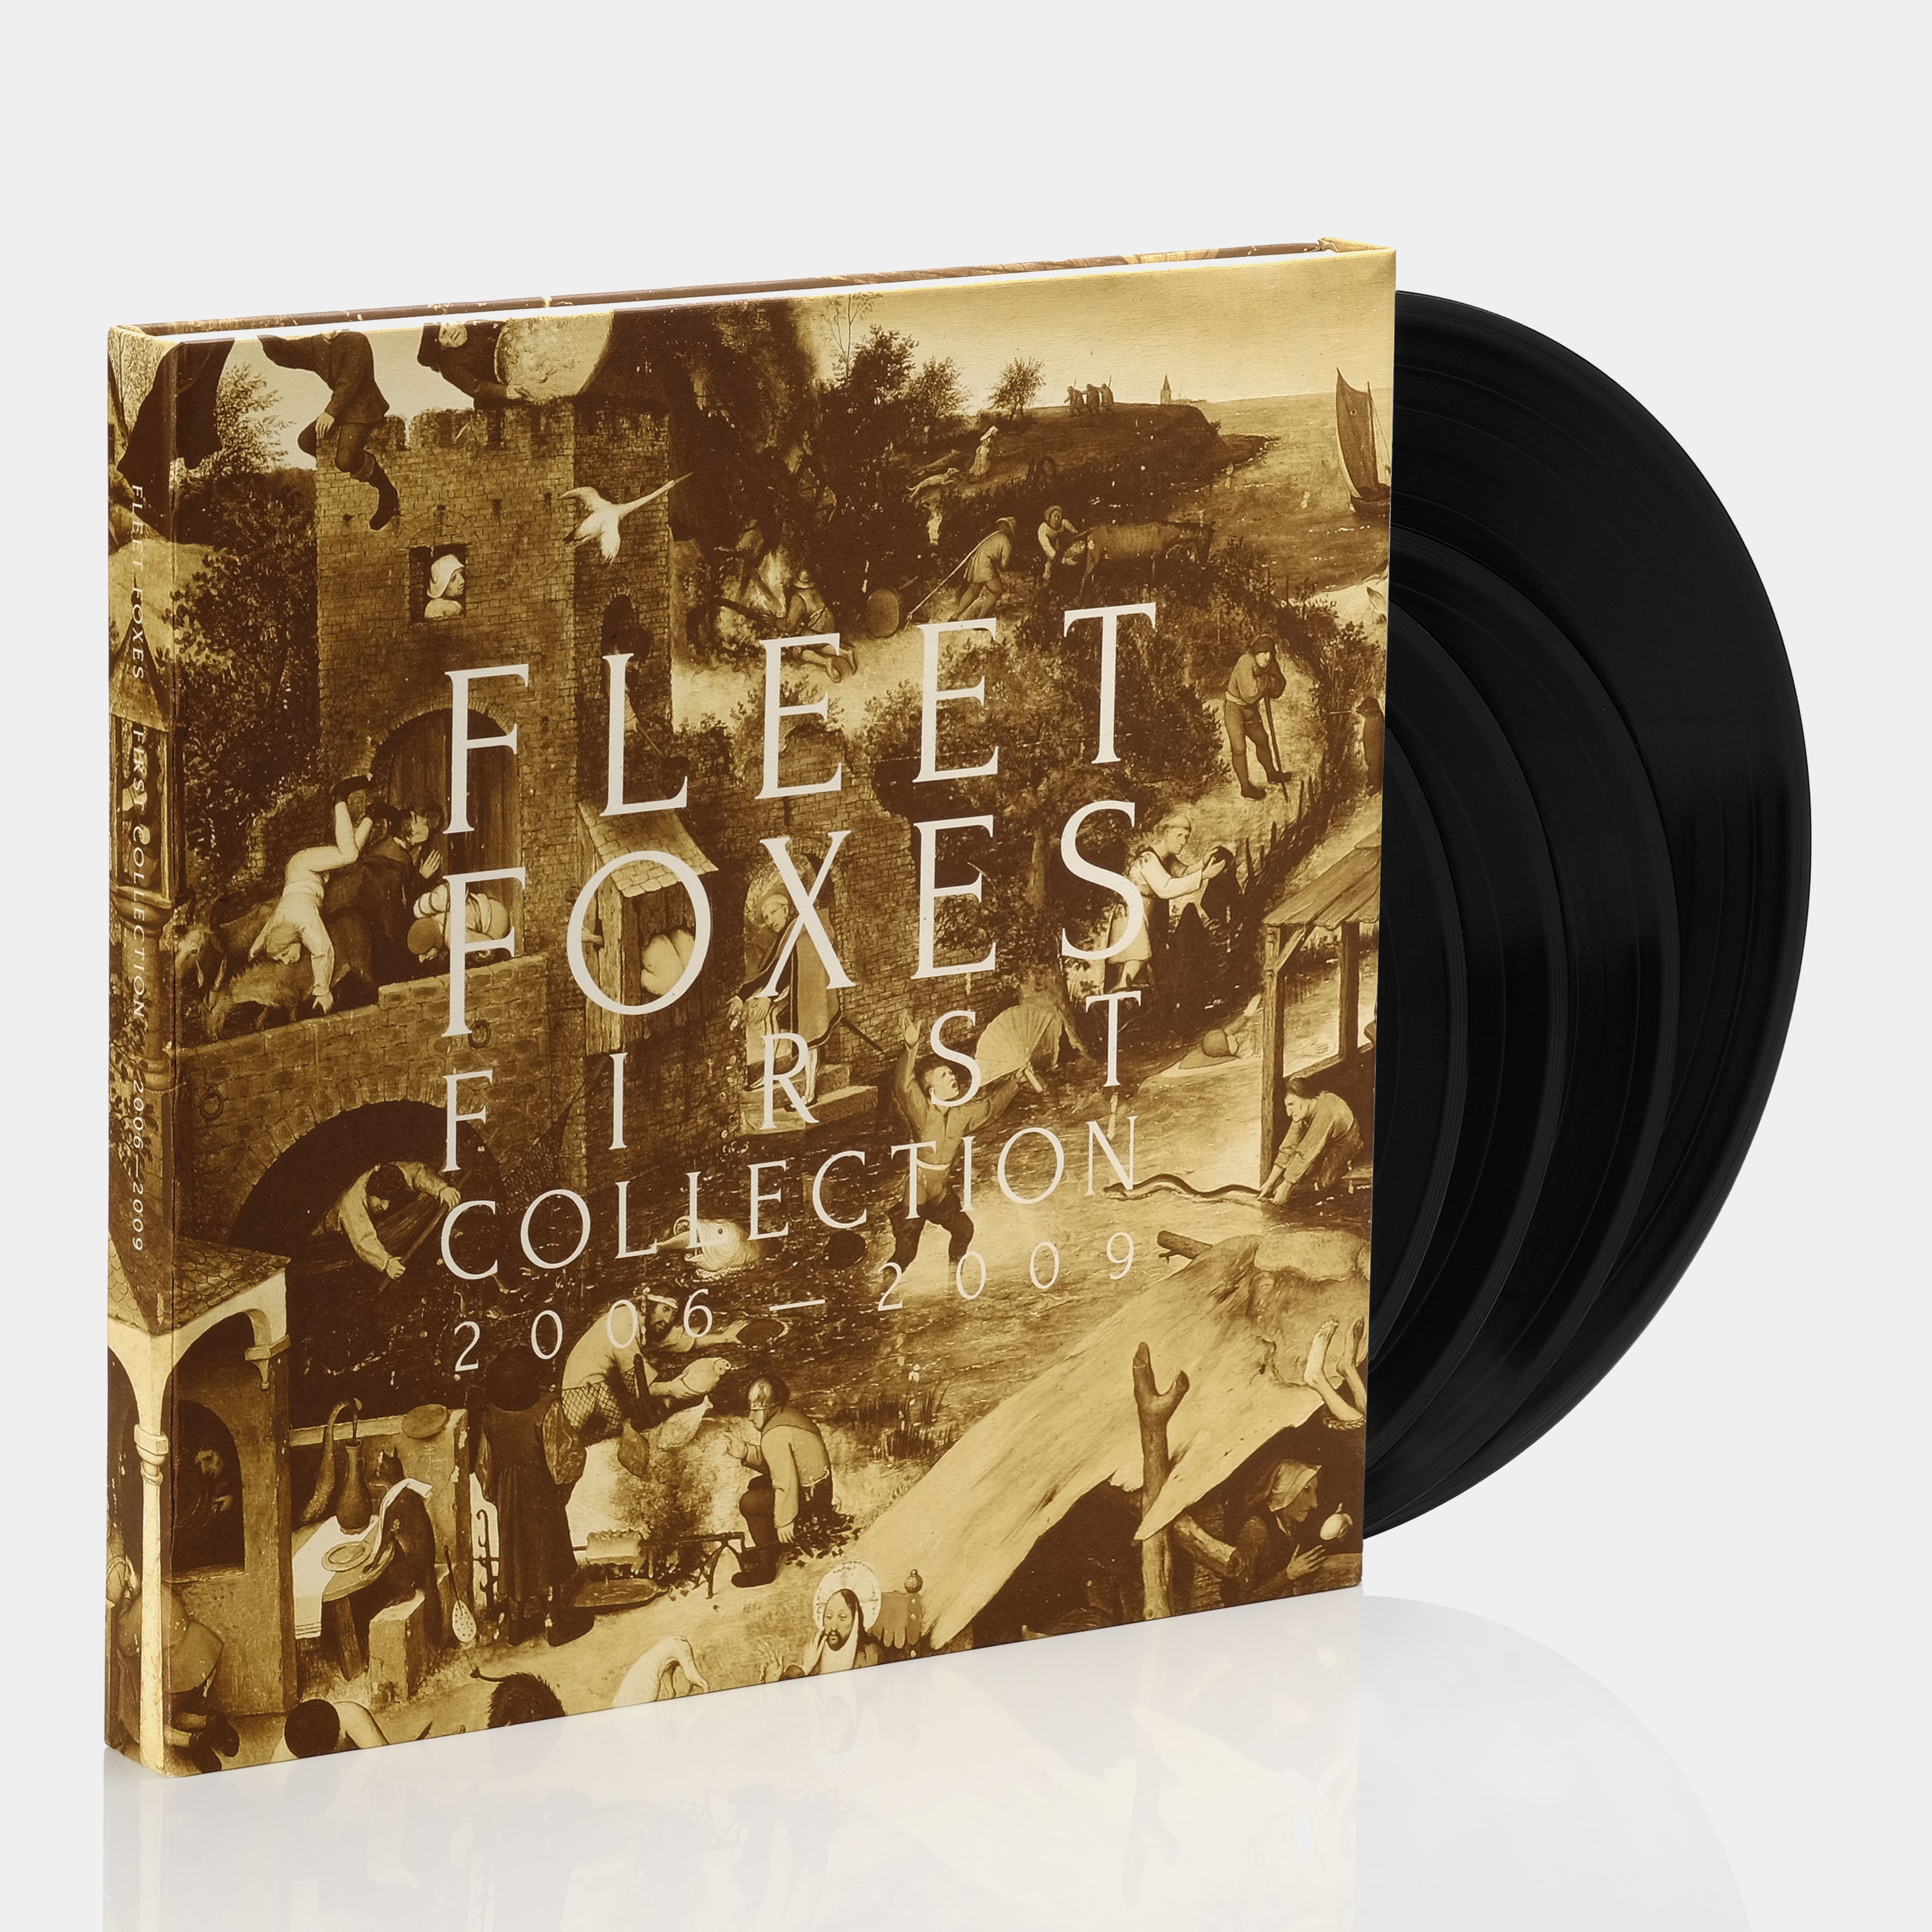 Fleet Foxes - First Collection 2006-2009 LP Vinyl Record + 3x10" EP